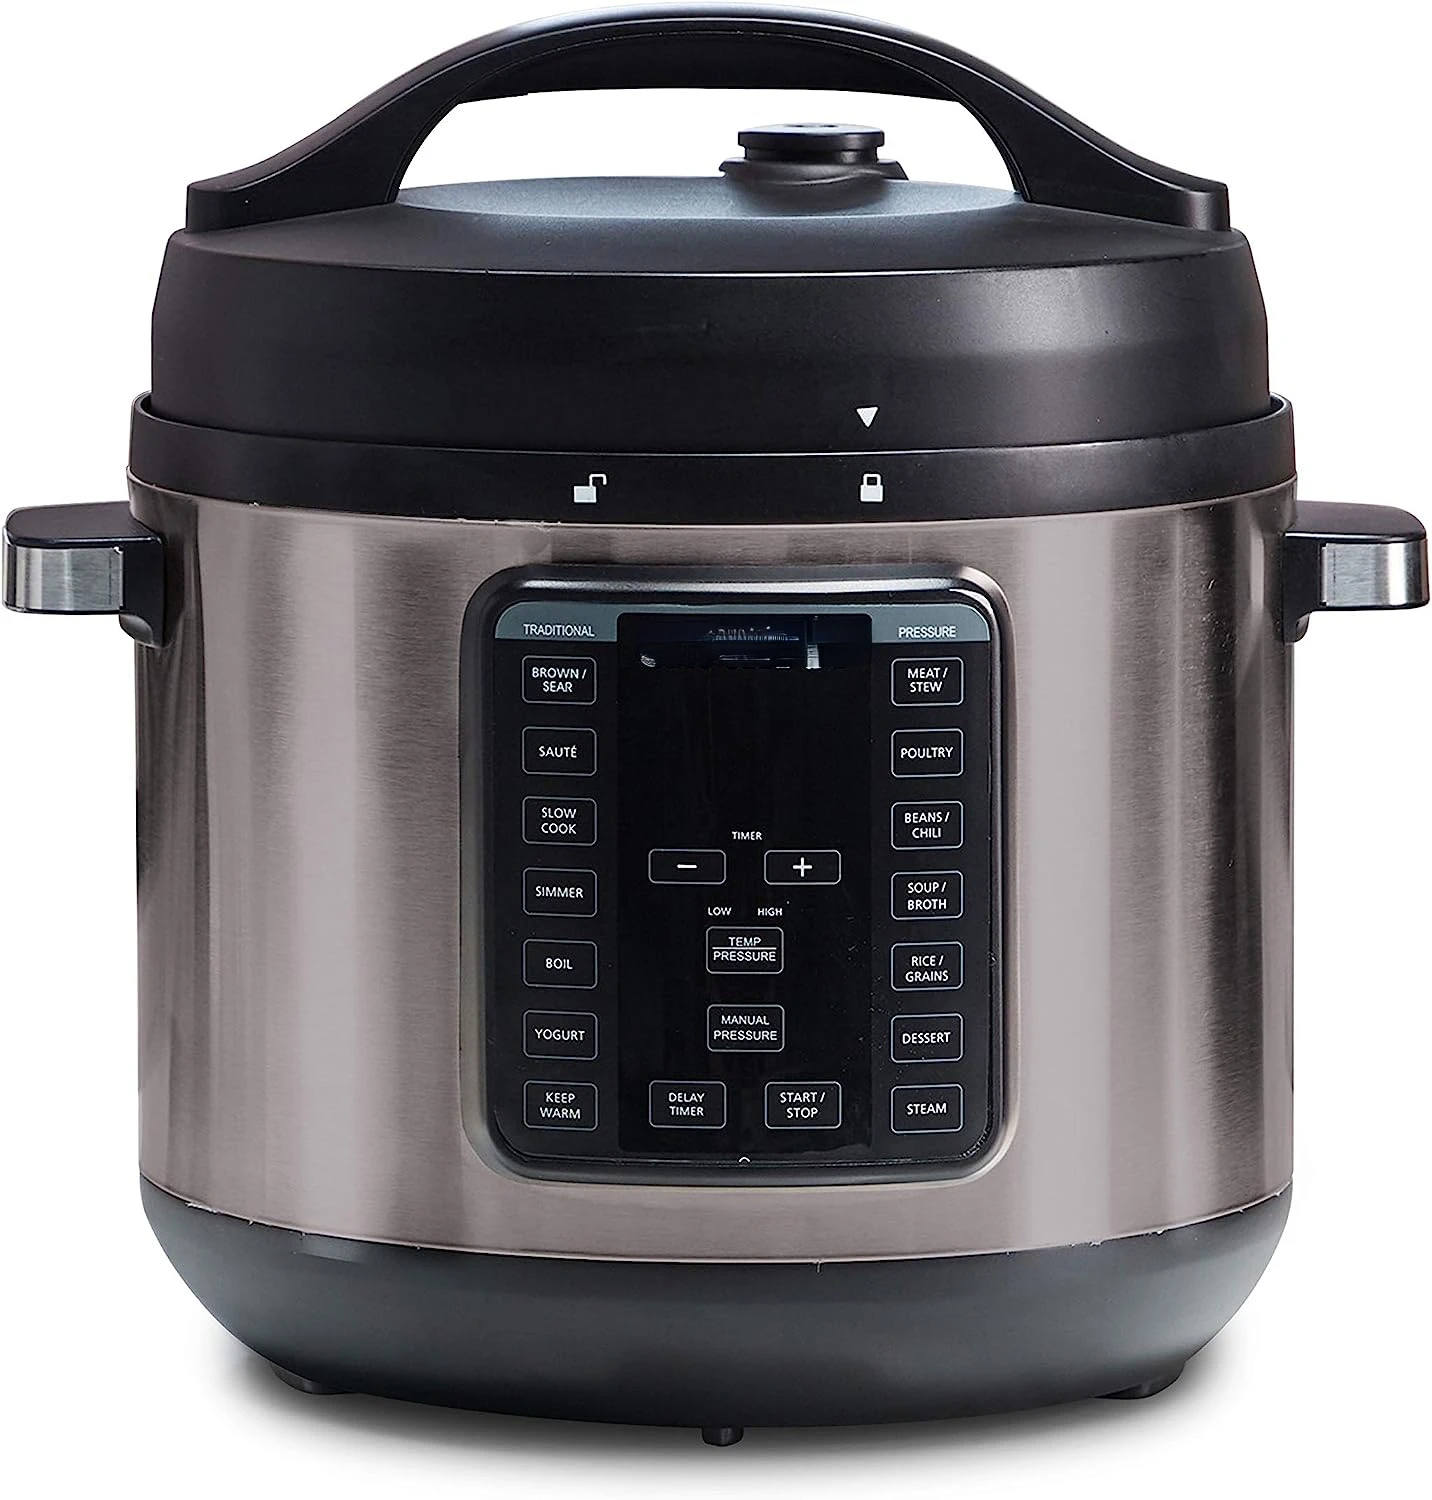 

Multi-Use XL Express Crock Programmable Slow Cooker and Pressure Cooker with Manual Pressure, Boil & Simmer, Black Stainless